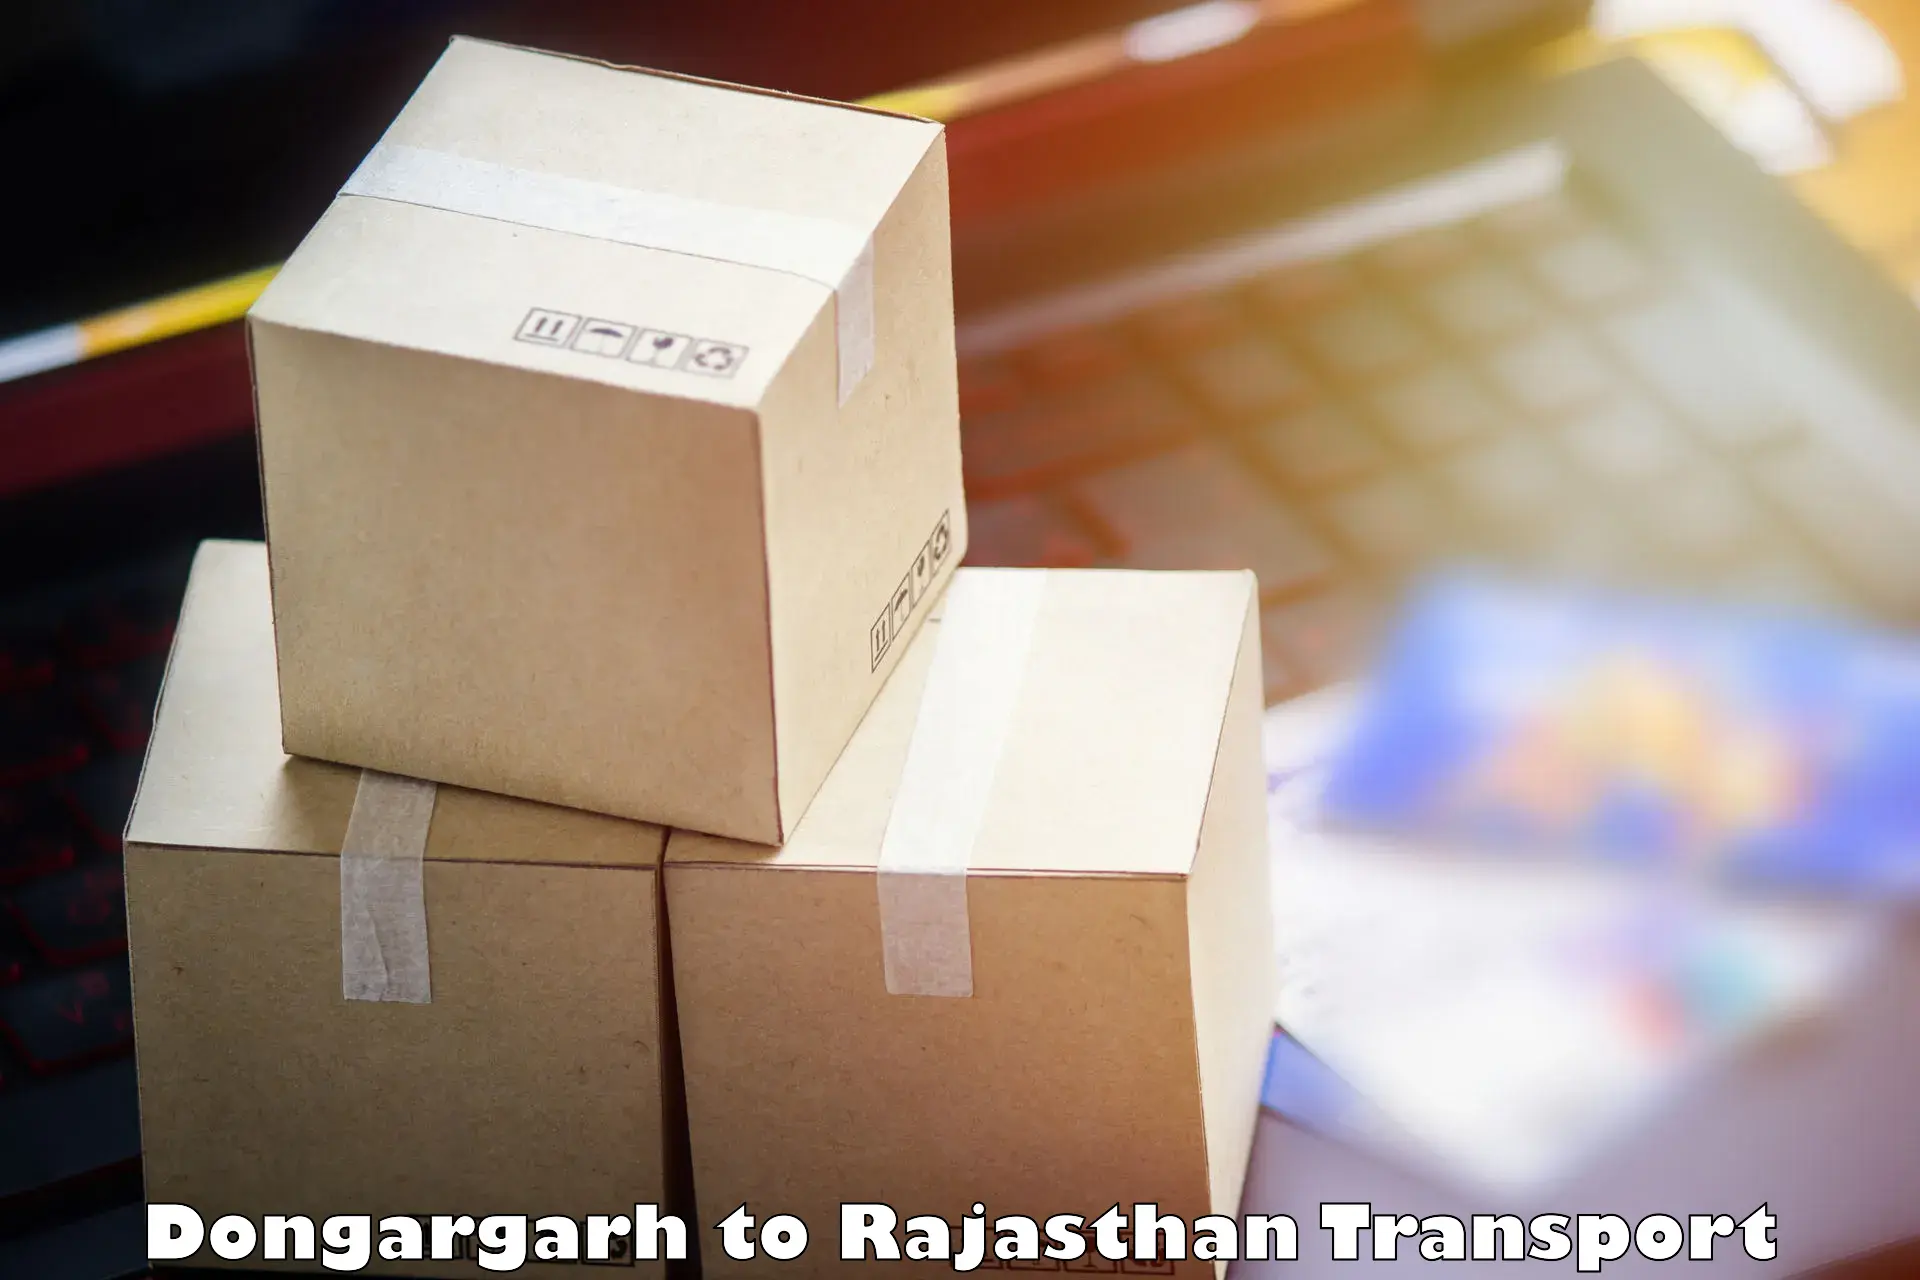 Vehicle transport services in Dongargarh to Laxmangarh